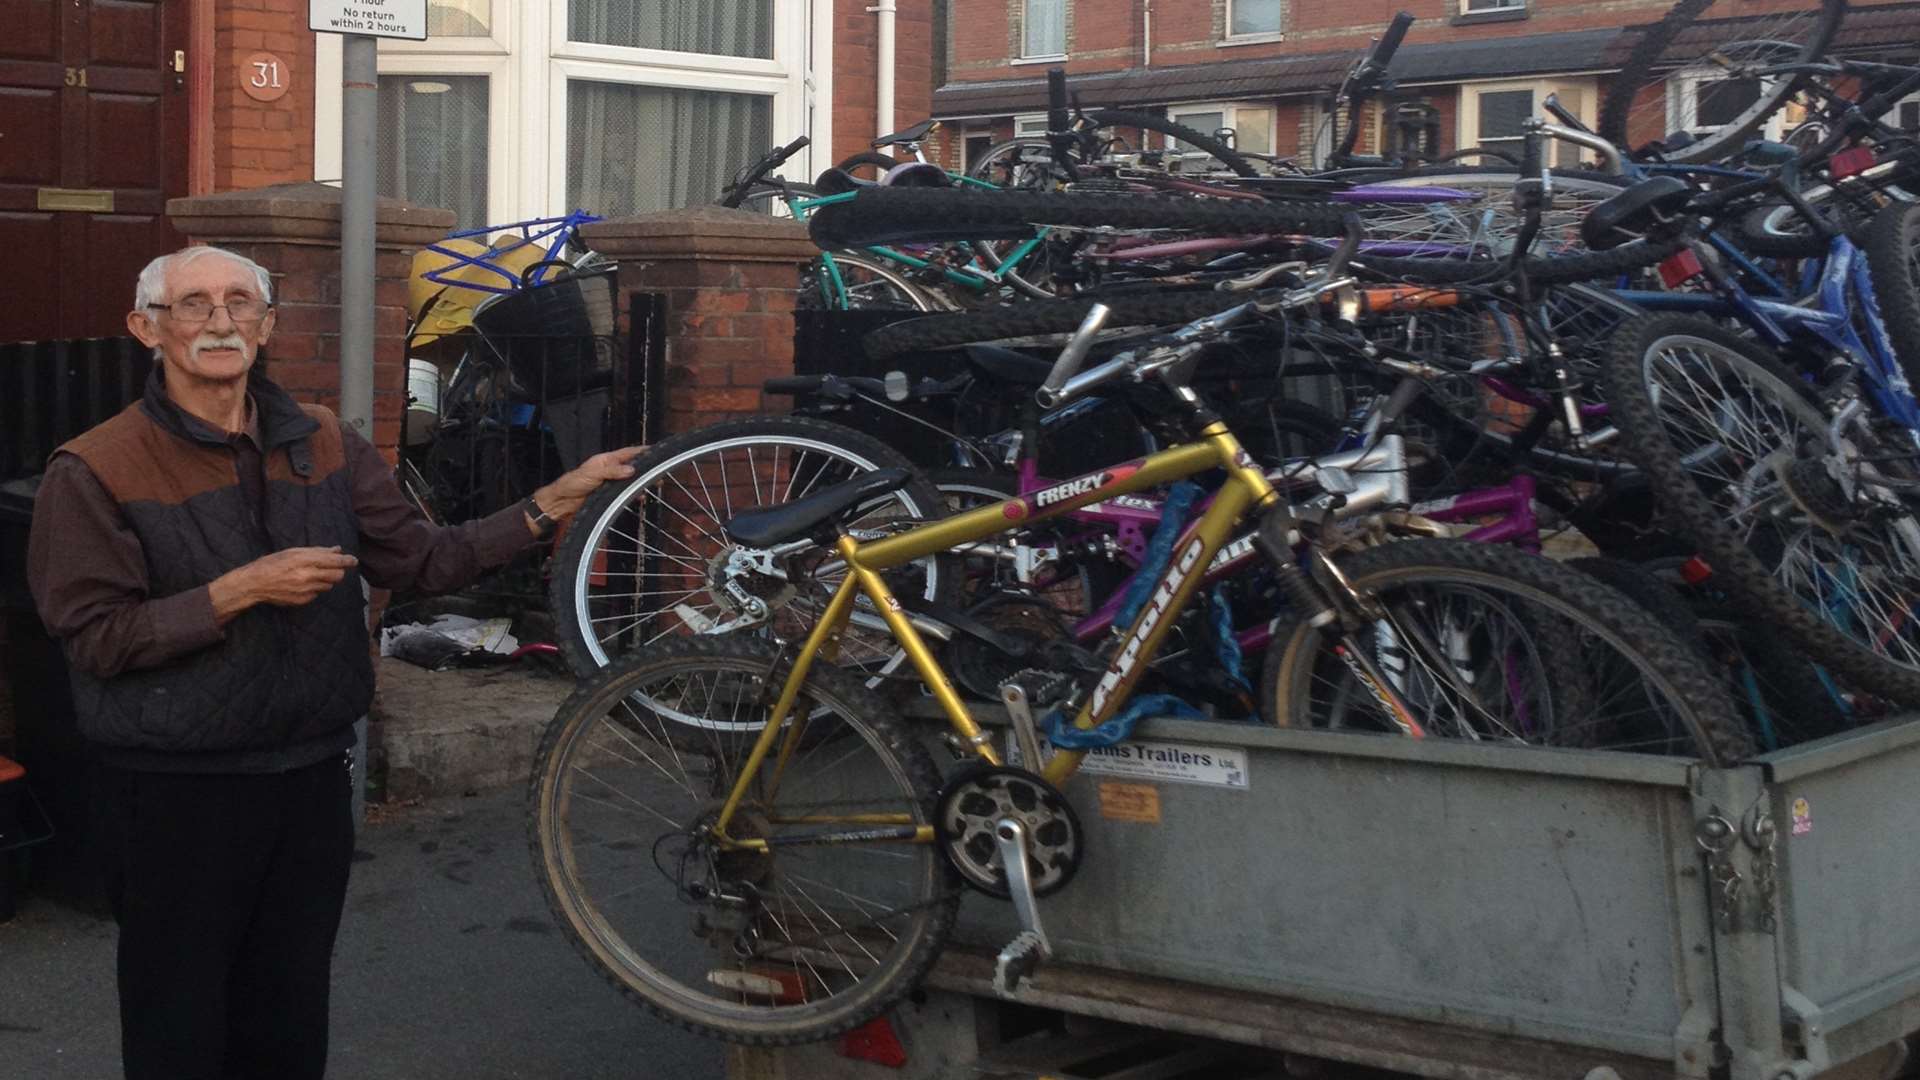 4 David Watts and his mountain of bicycles left some neighbours in Maidstone branding it an eyesore, but what was his excuse?